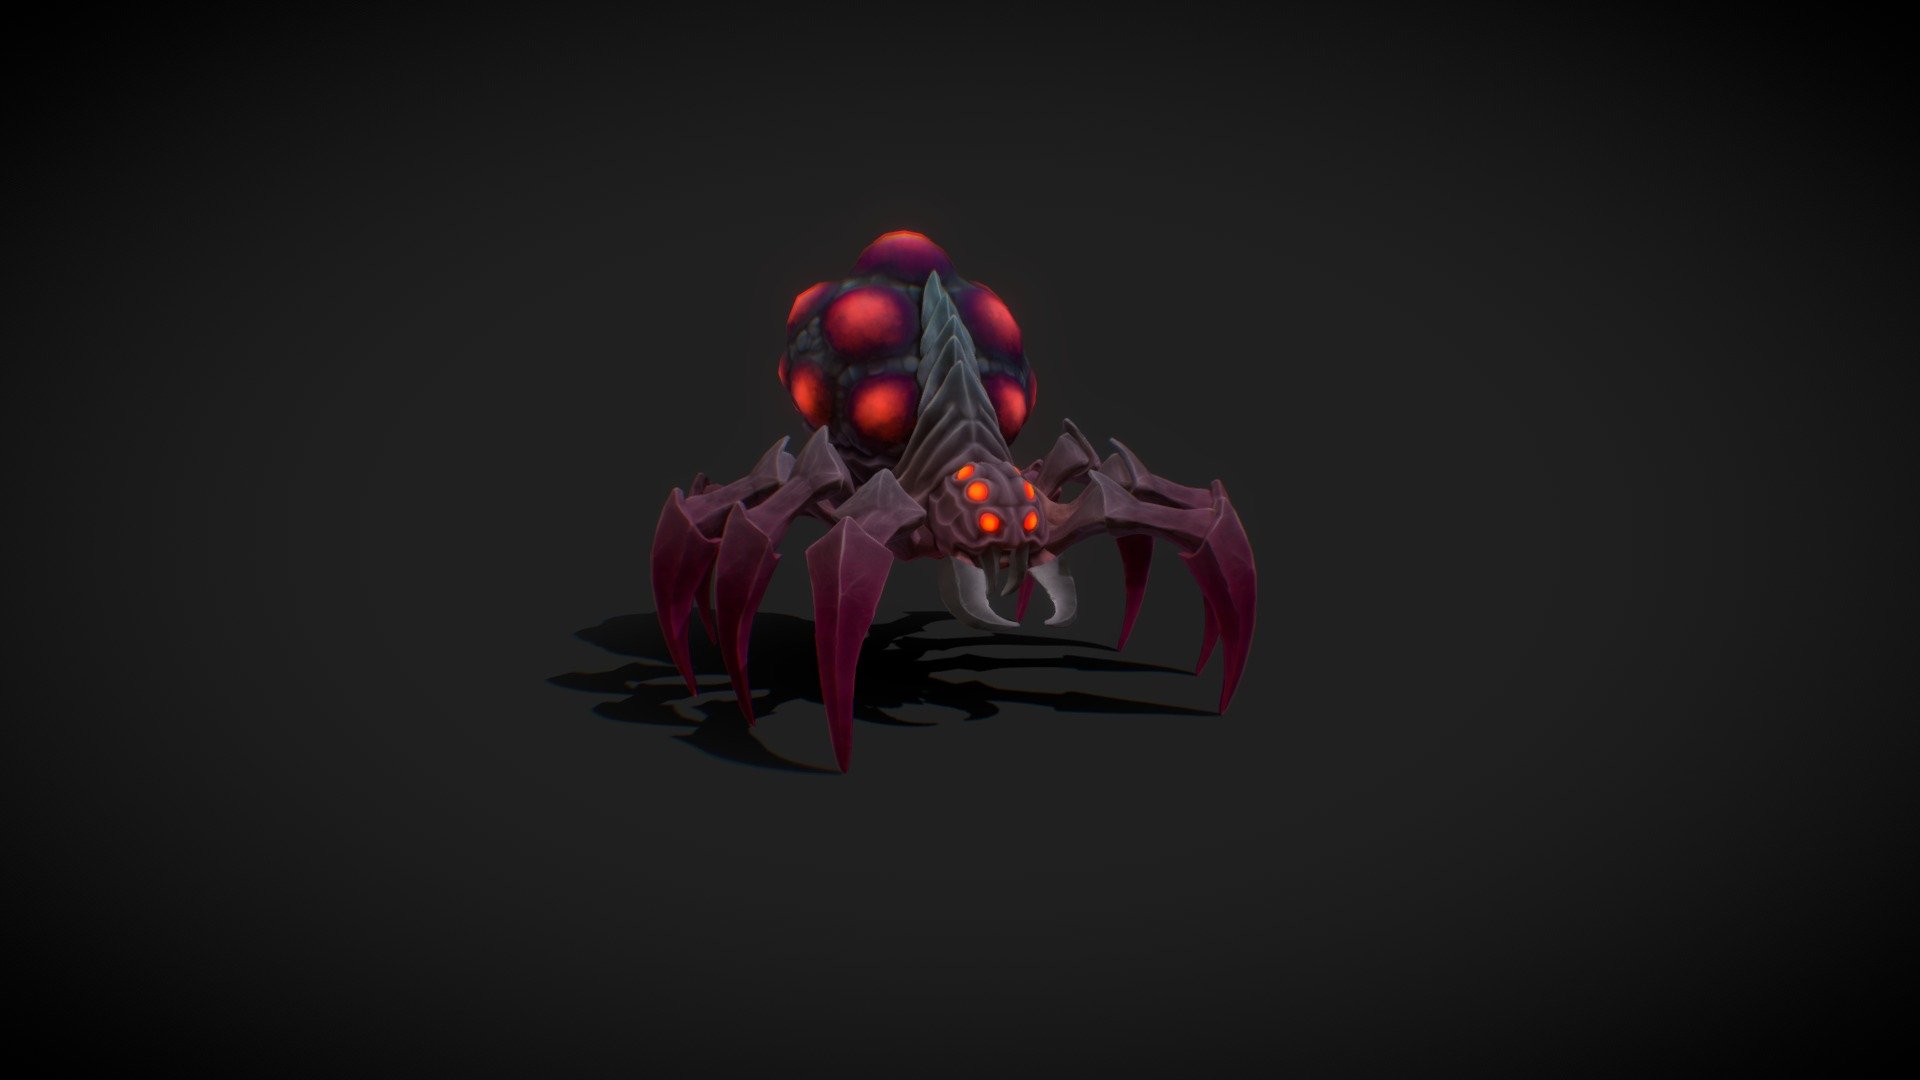 Available on unreal engine marketplace




Asset contains :




Spider

Spider egg

Empty spider Egg

Rigged: Yes

Animated: Yes

Number of Animations: 7




Idle 

Idle 2

Walk

Hit

Uprise

Attack

Explosion_Death

Animation types: In-place

Number of characters: 1

Models has Lods x 4 :




LOD_0 : 4.534 verts.

LOD_1 : 3.020 verts.

LOD_2 : 2.008 verts.

LOD_3 : 904 verts.
 - Spider Minion ( 7 animations, 3 skins ) - 3D model by Lil_Pupinduy 3d model